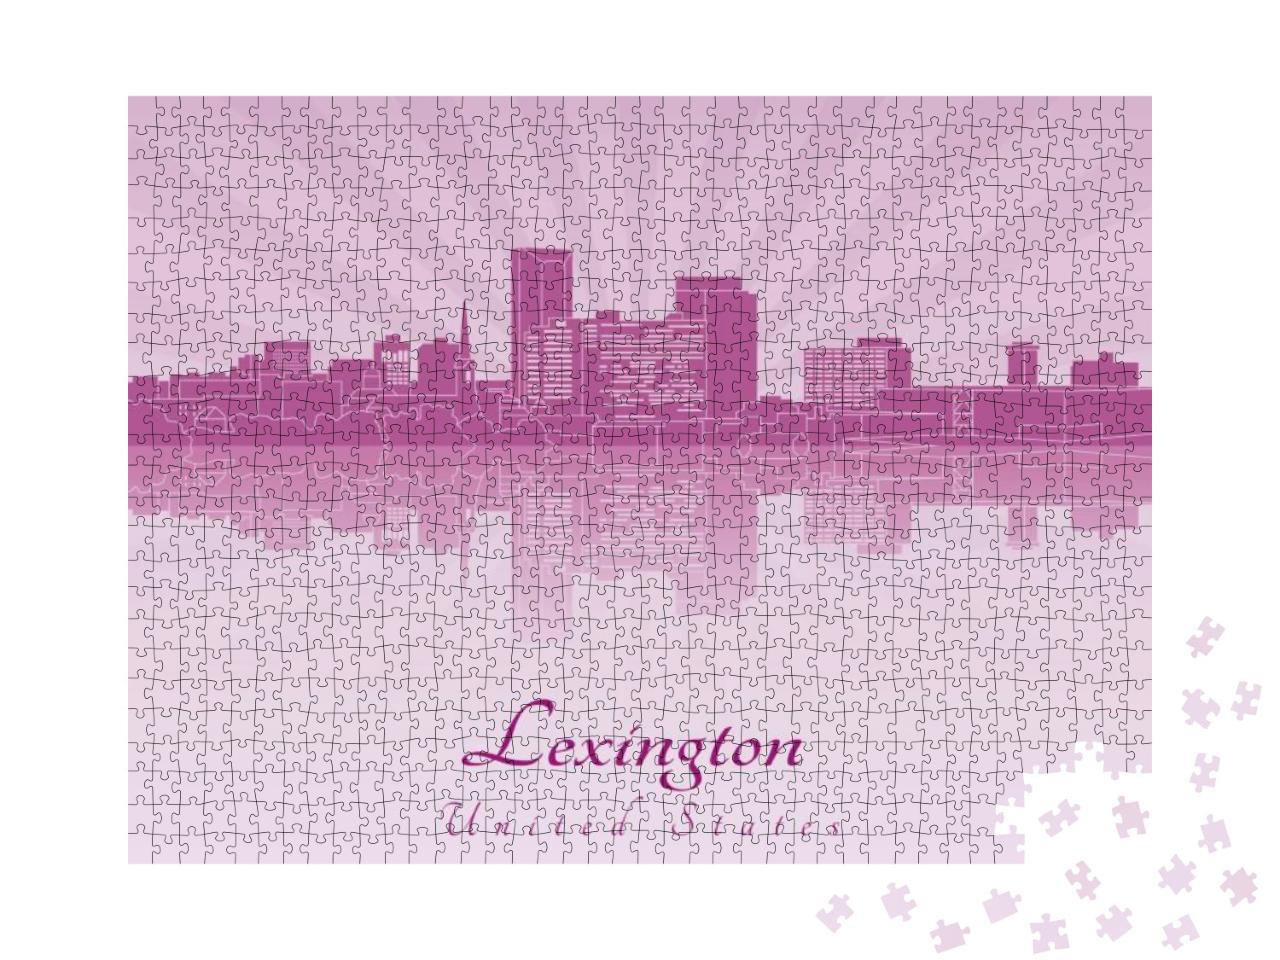 Lexington Skyline in Purple Radiant Orchid in Editable Ve... Jigsaw Puzzle with 1000 pieces